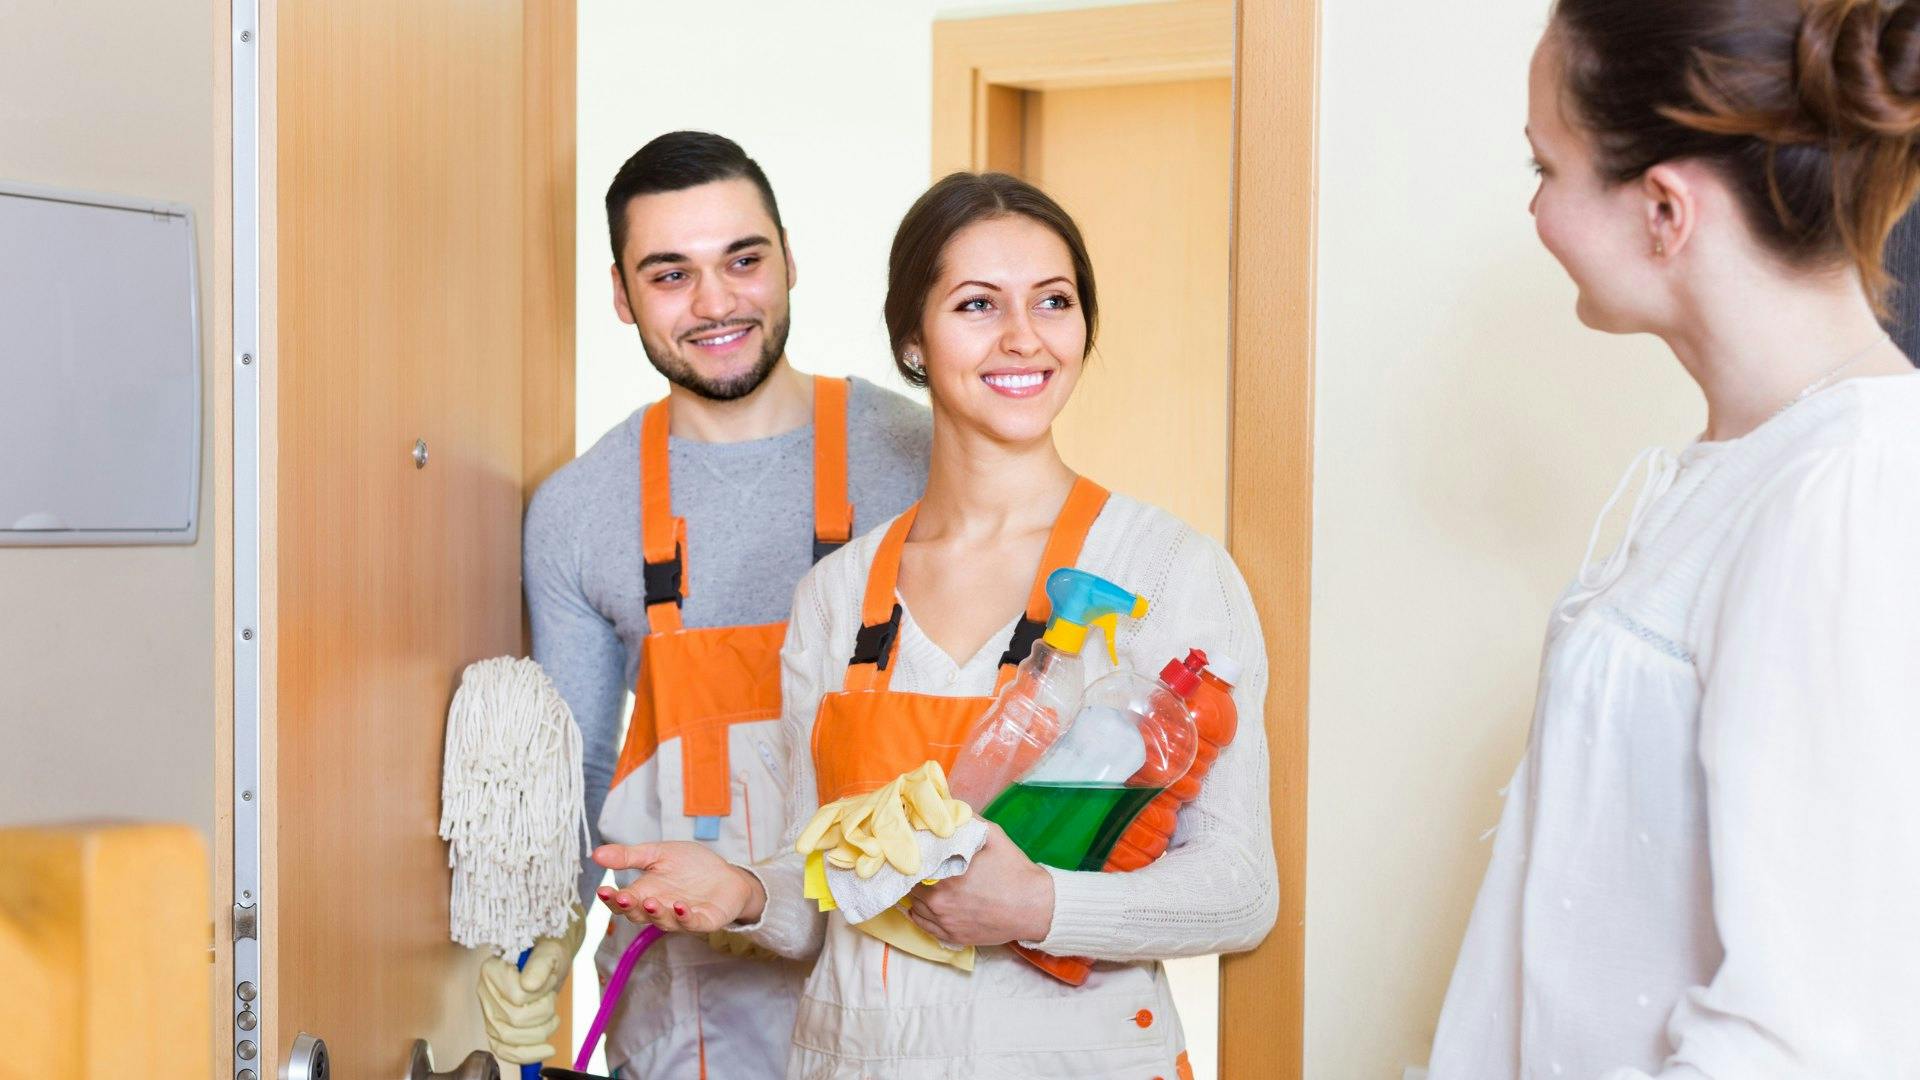 House cleaners being welcomed in to a home by homeowner while holding cleaning supplies